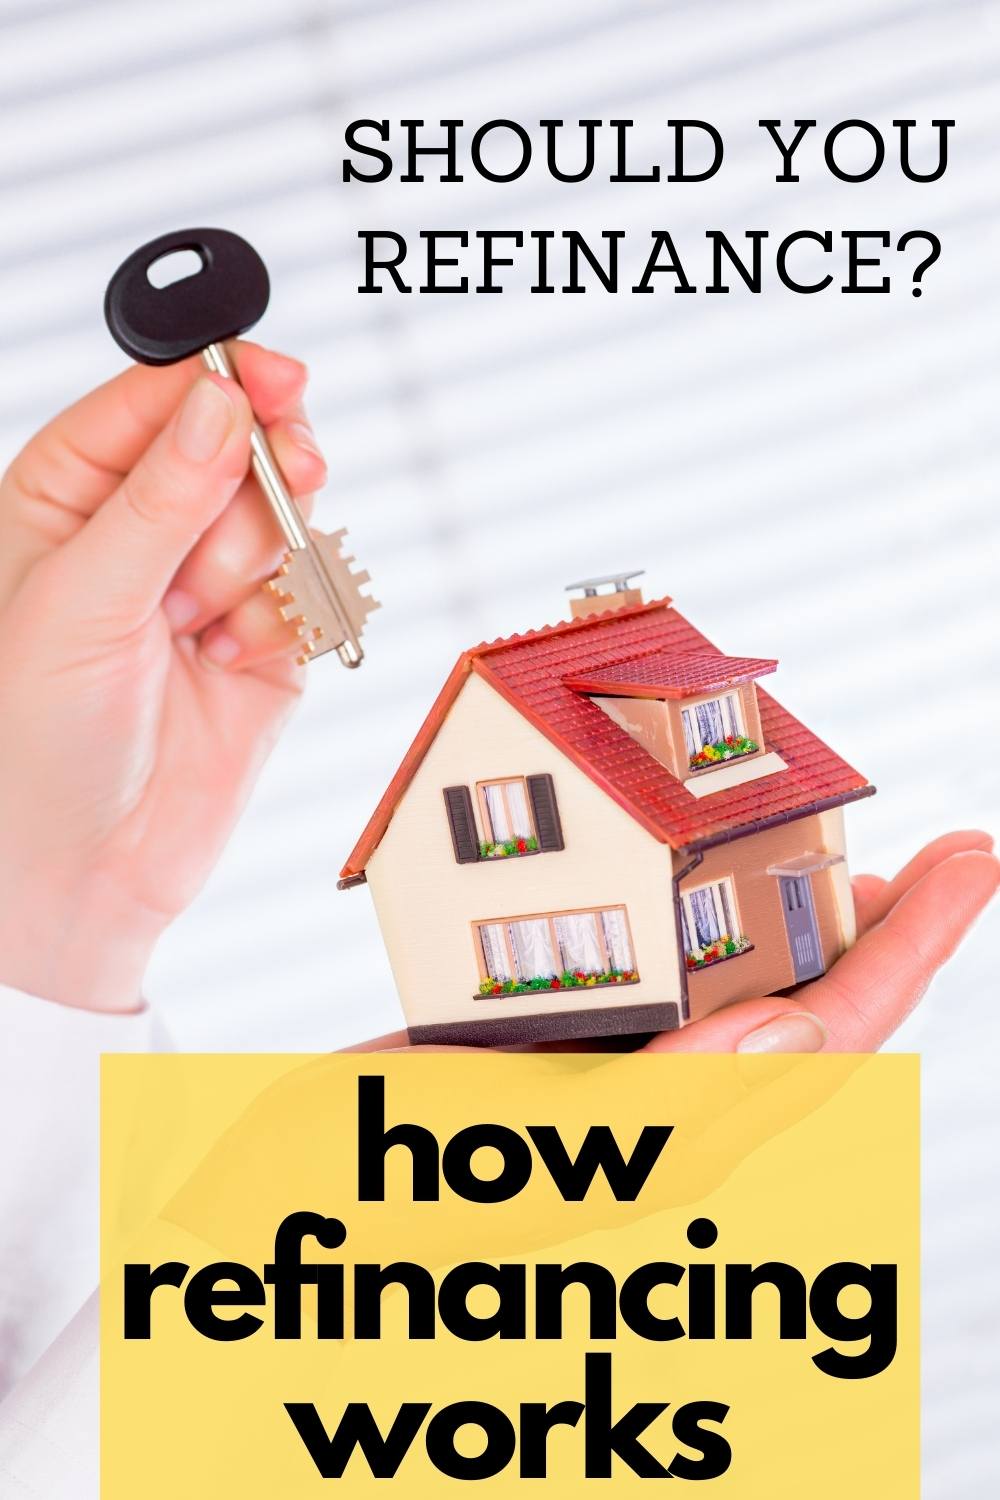 With mortgage rates so low, this is a great time to look into refinancing your loan.  Get a lower monthly payment and save thousands in interest.  Here's how it works and what to look for in a loan: